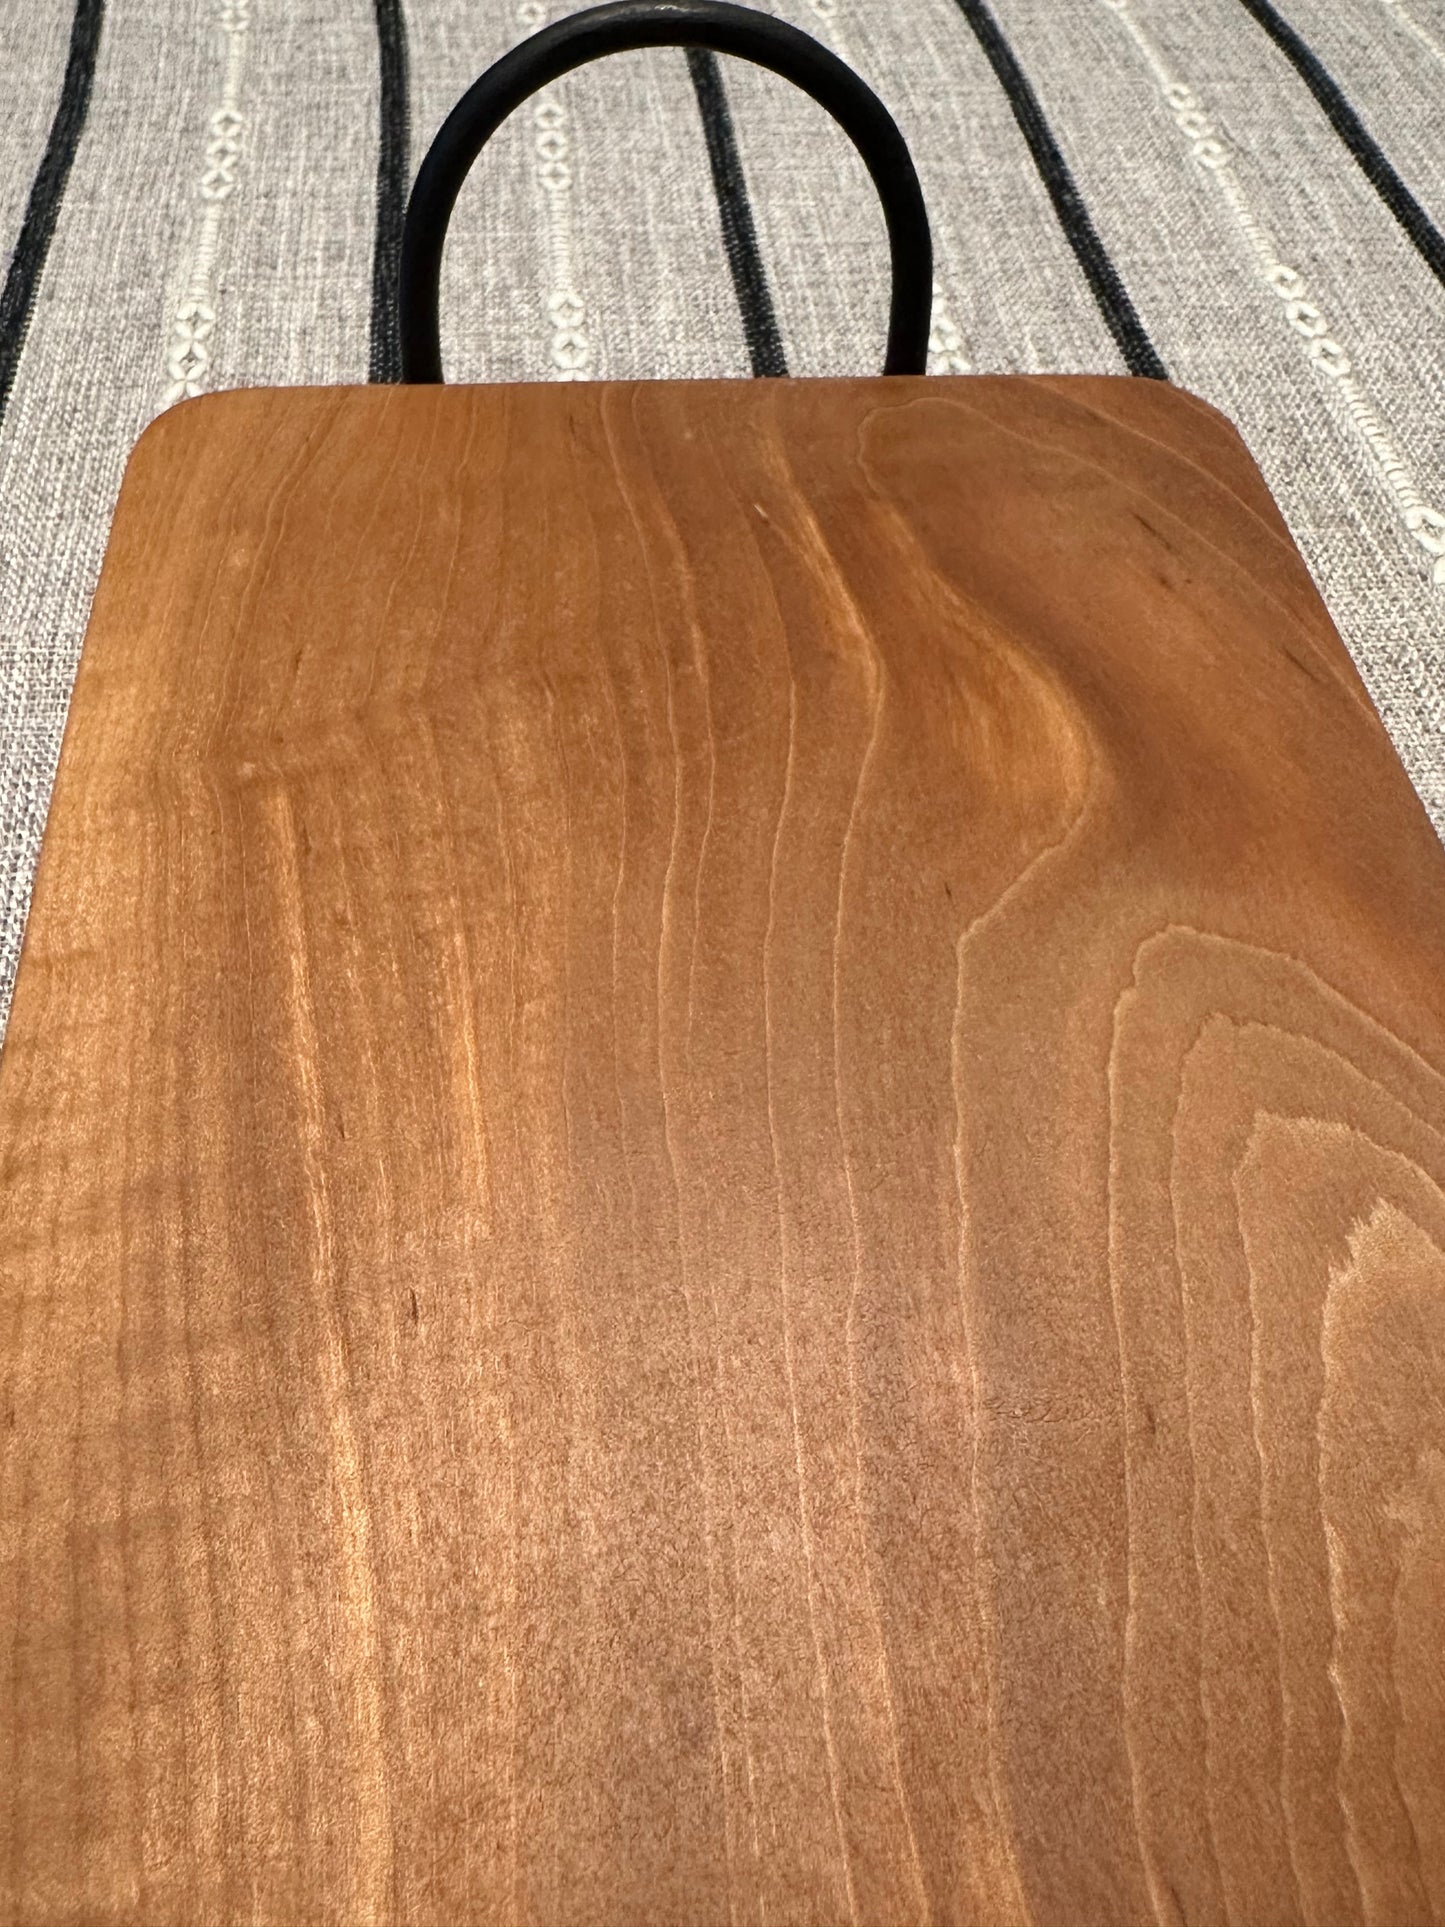 Tiger maple tray with handles